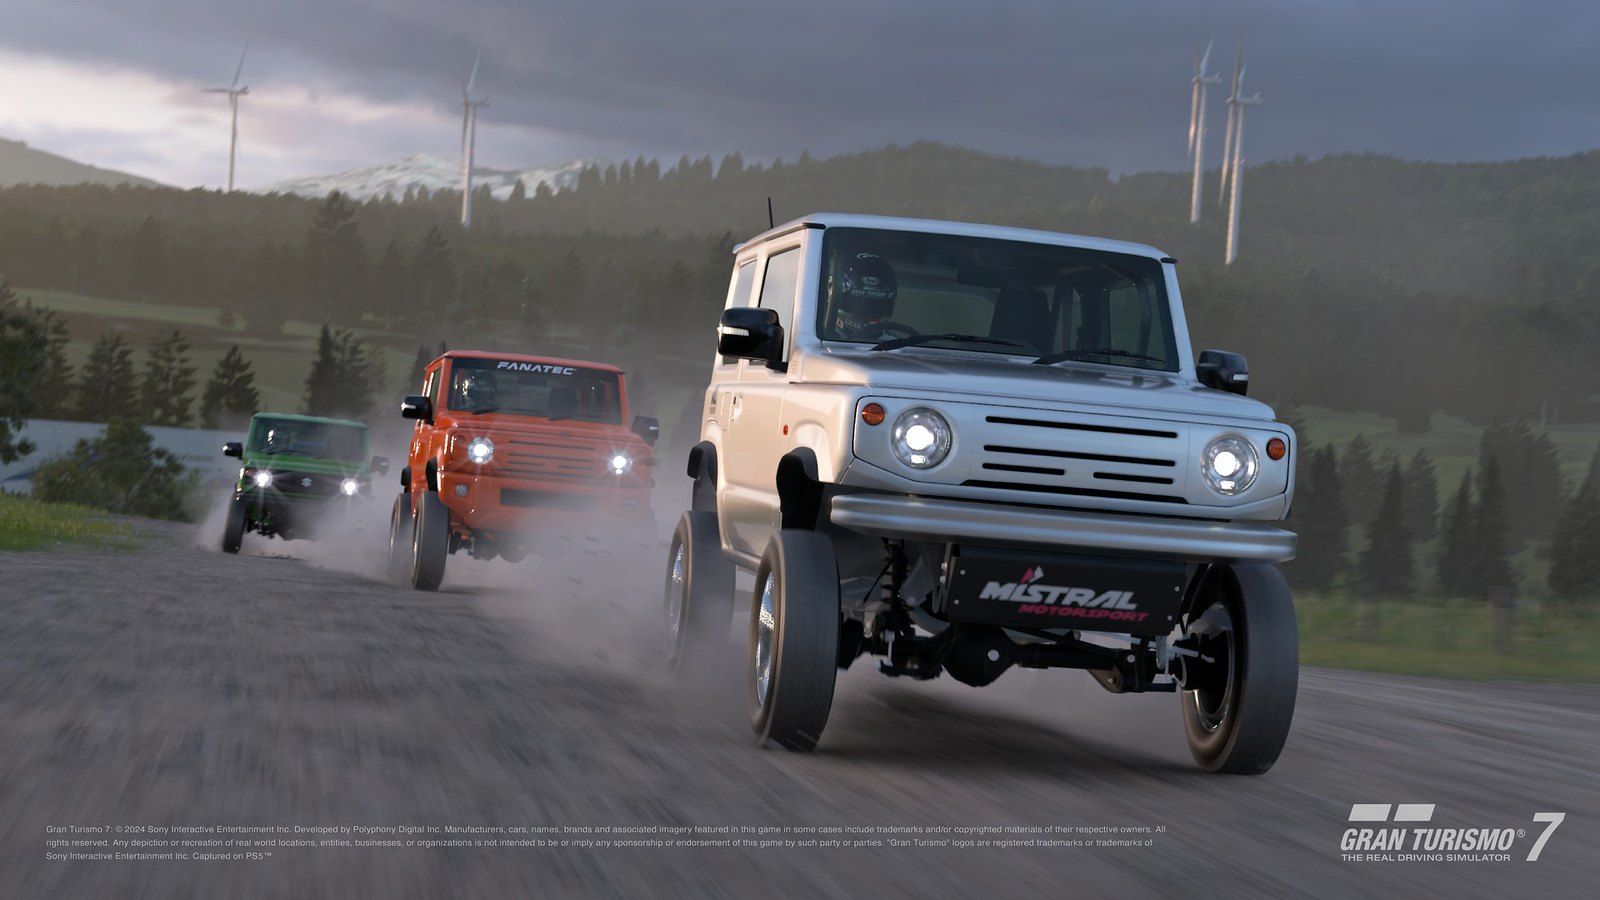 Gran Turismo 7 January Update Brings 3 New Cars and Suzuki Jimny Cup Event